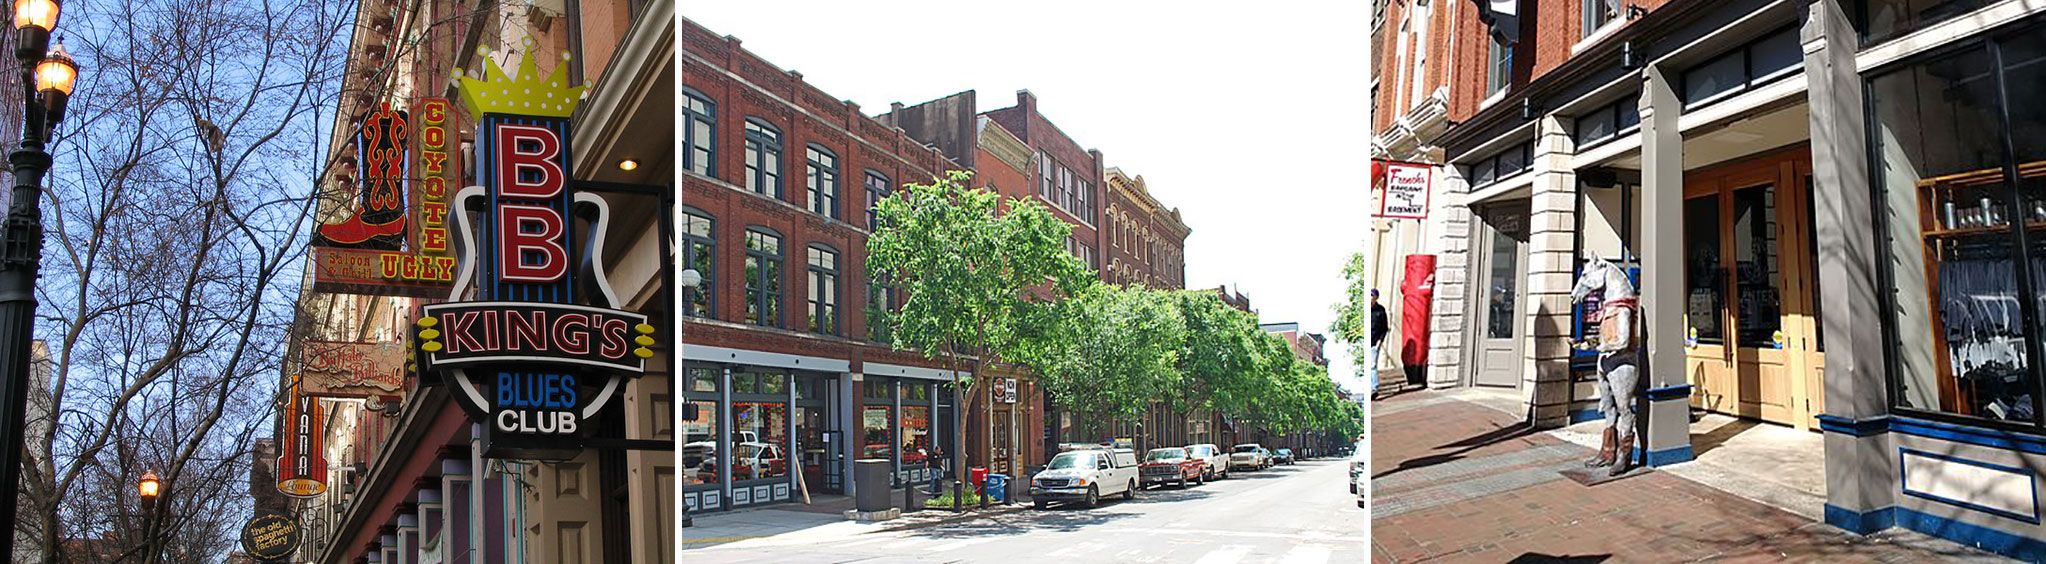 Second Avenue Shopping District